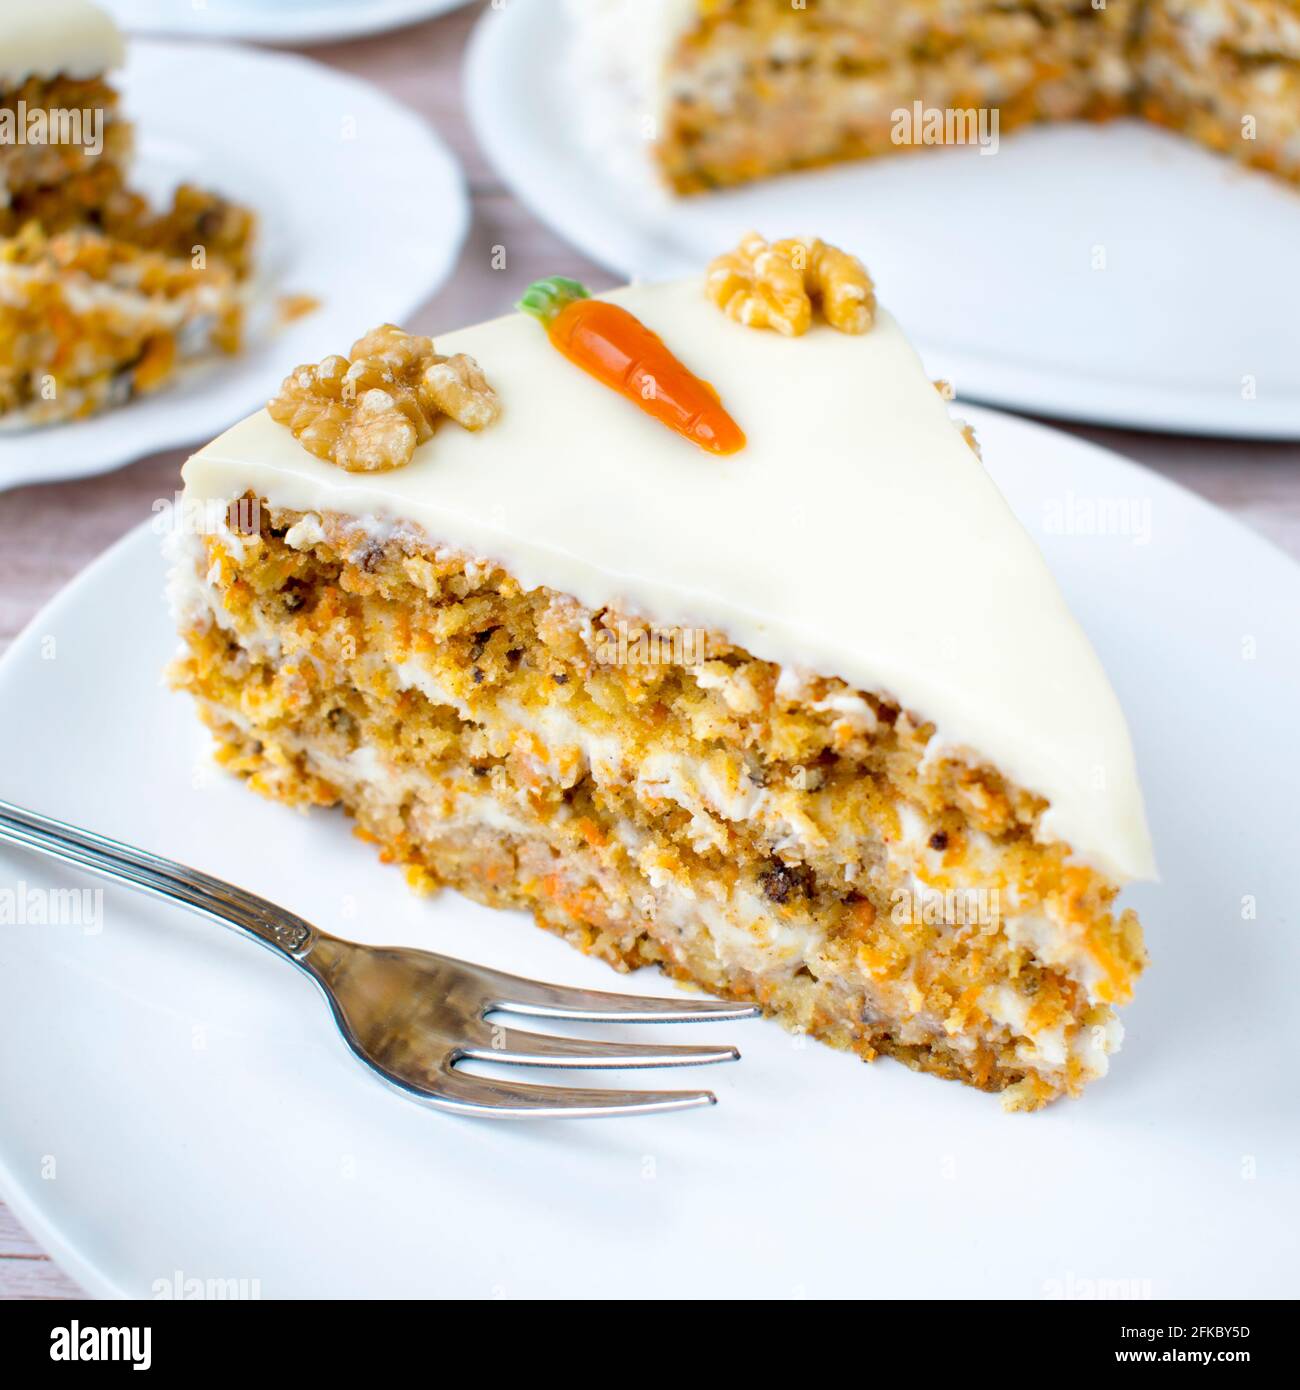 Homemade carrot cake with coconut cream. Structured cake with walnuts, pineapple and coconut flakes on a wood background. Stock Photo